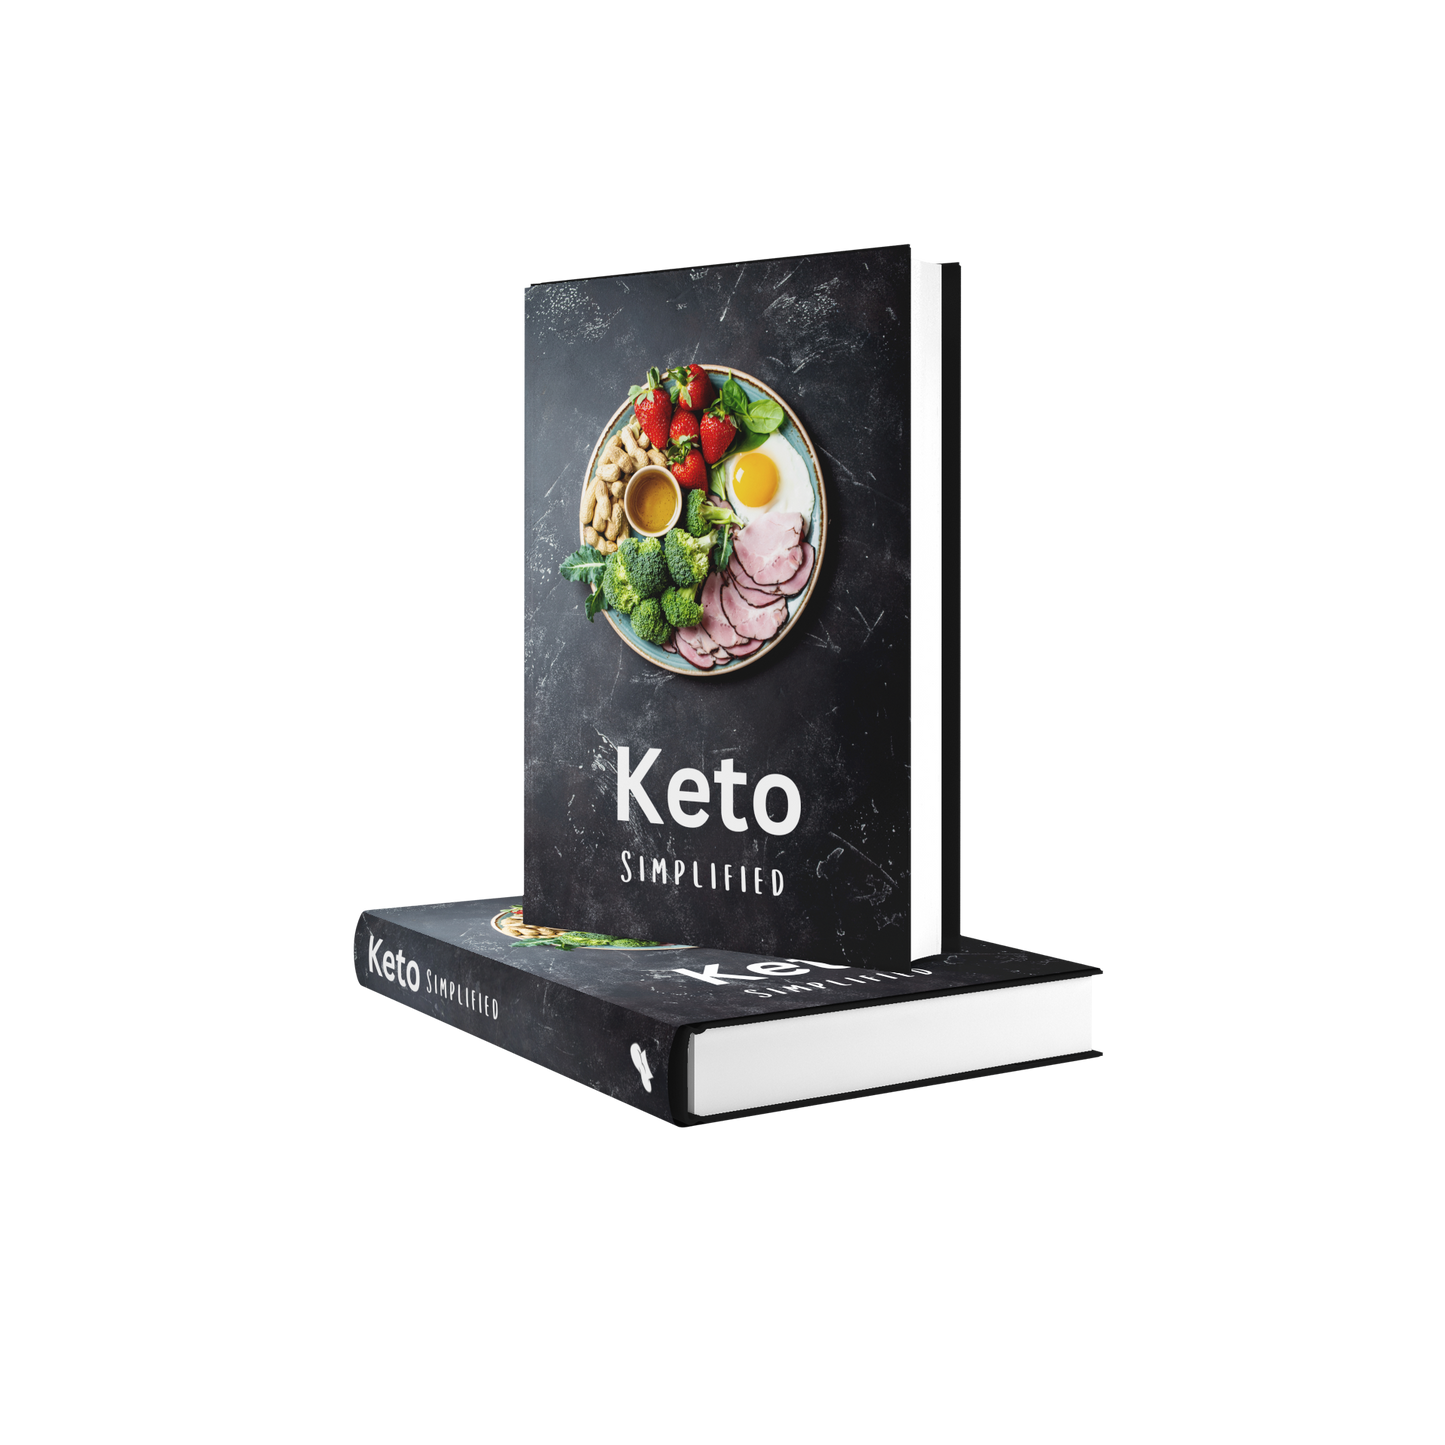 Keto Simplified: The Essential Guide to a Healthy Keto Lifestyle